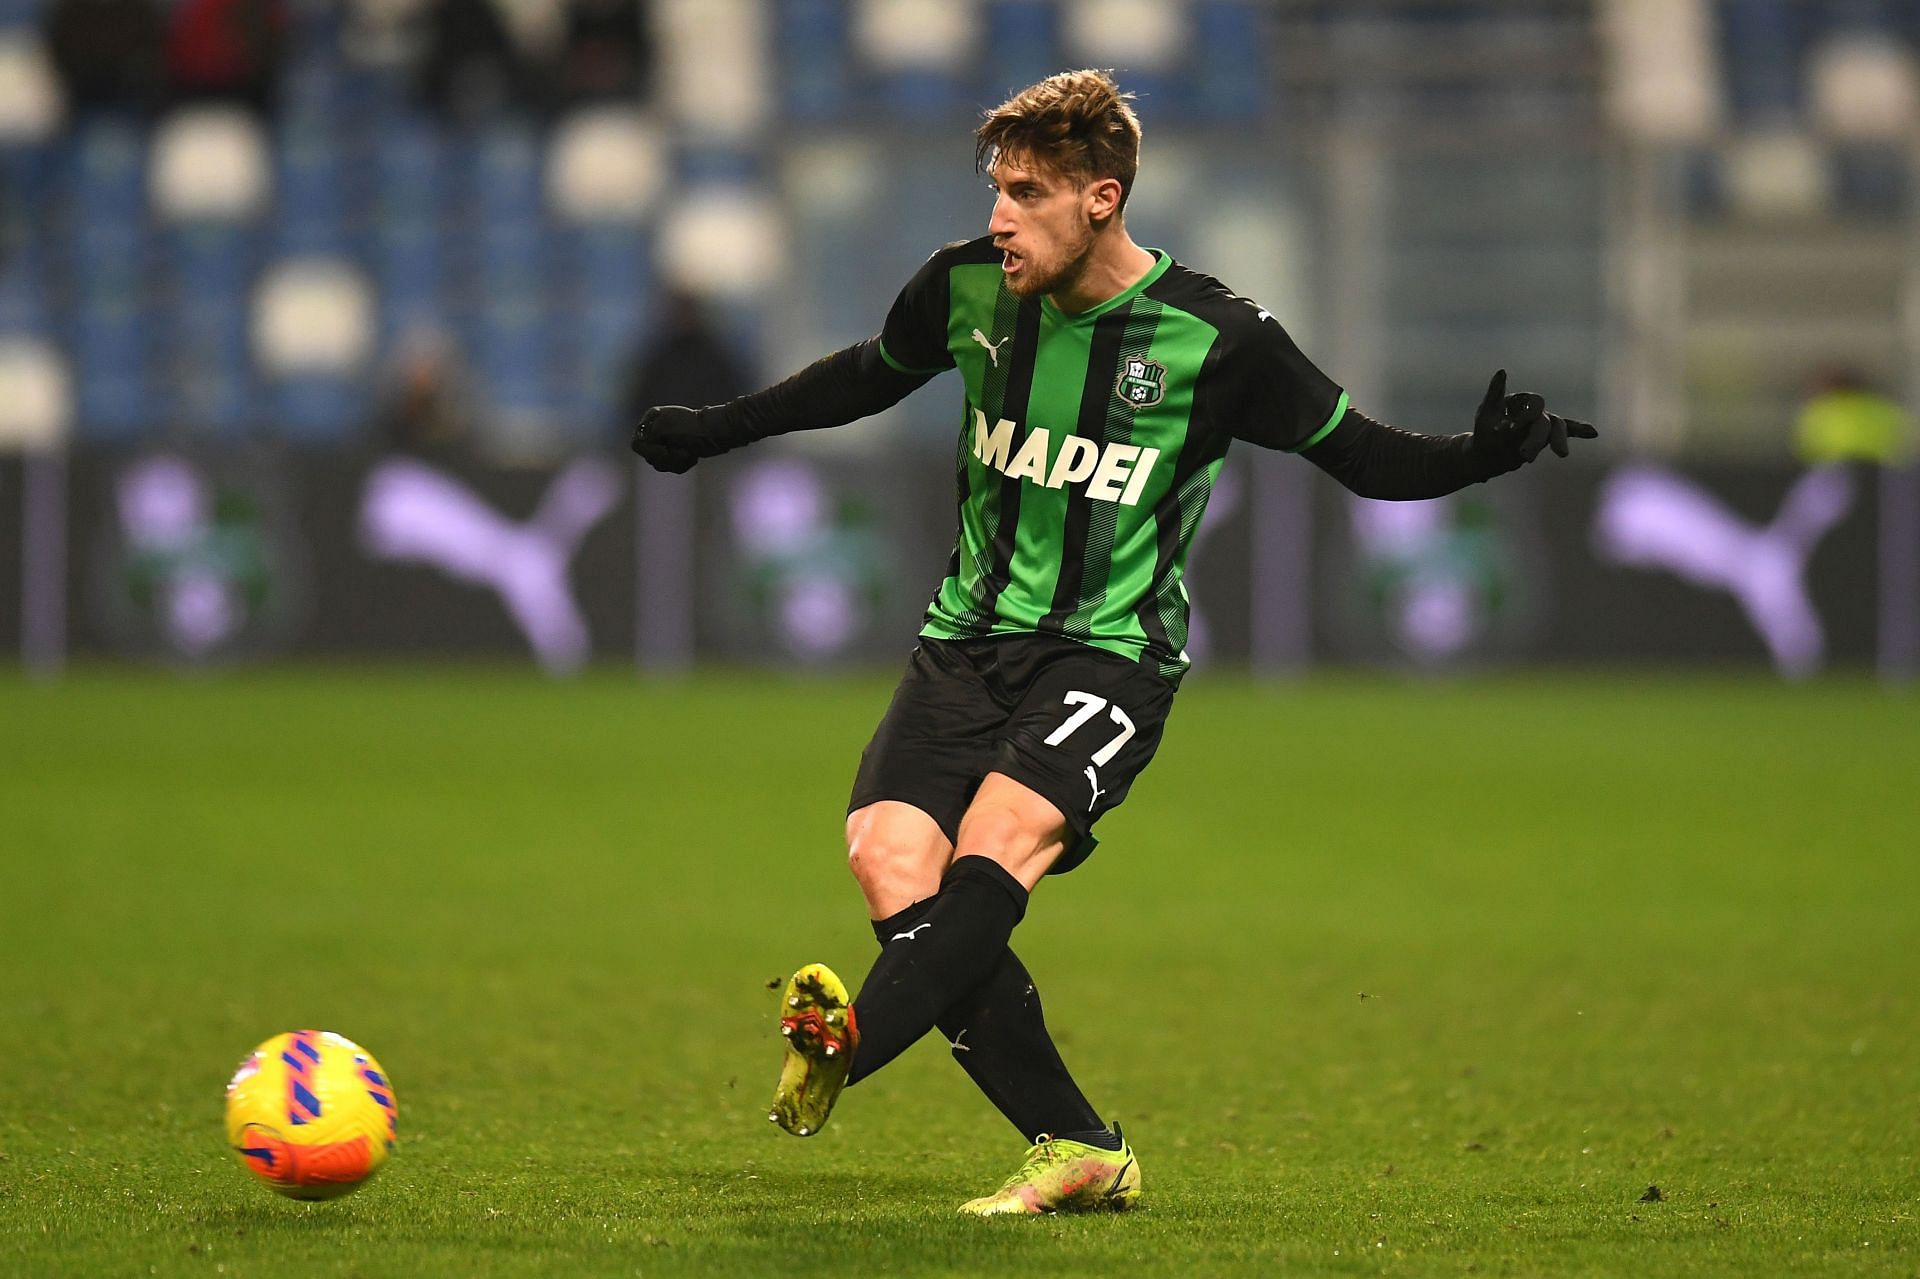 Sassuolo travel to Empoli in their upcoming Serie A fixture on Sunday